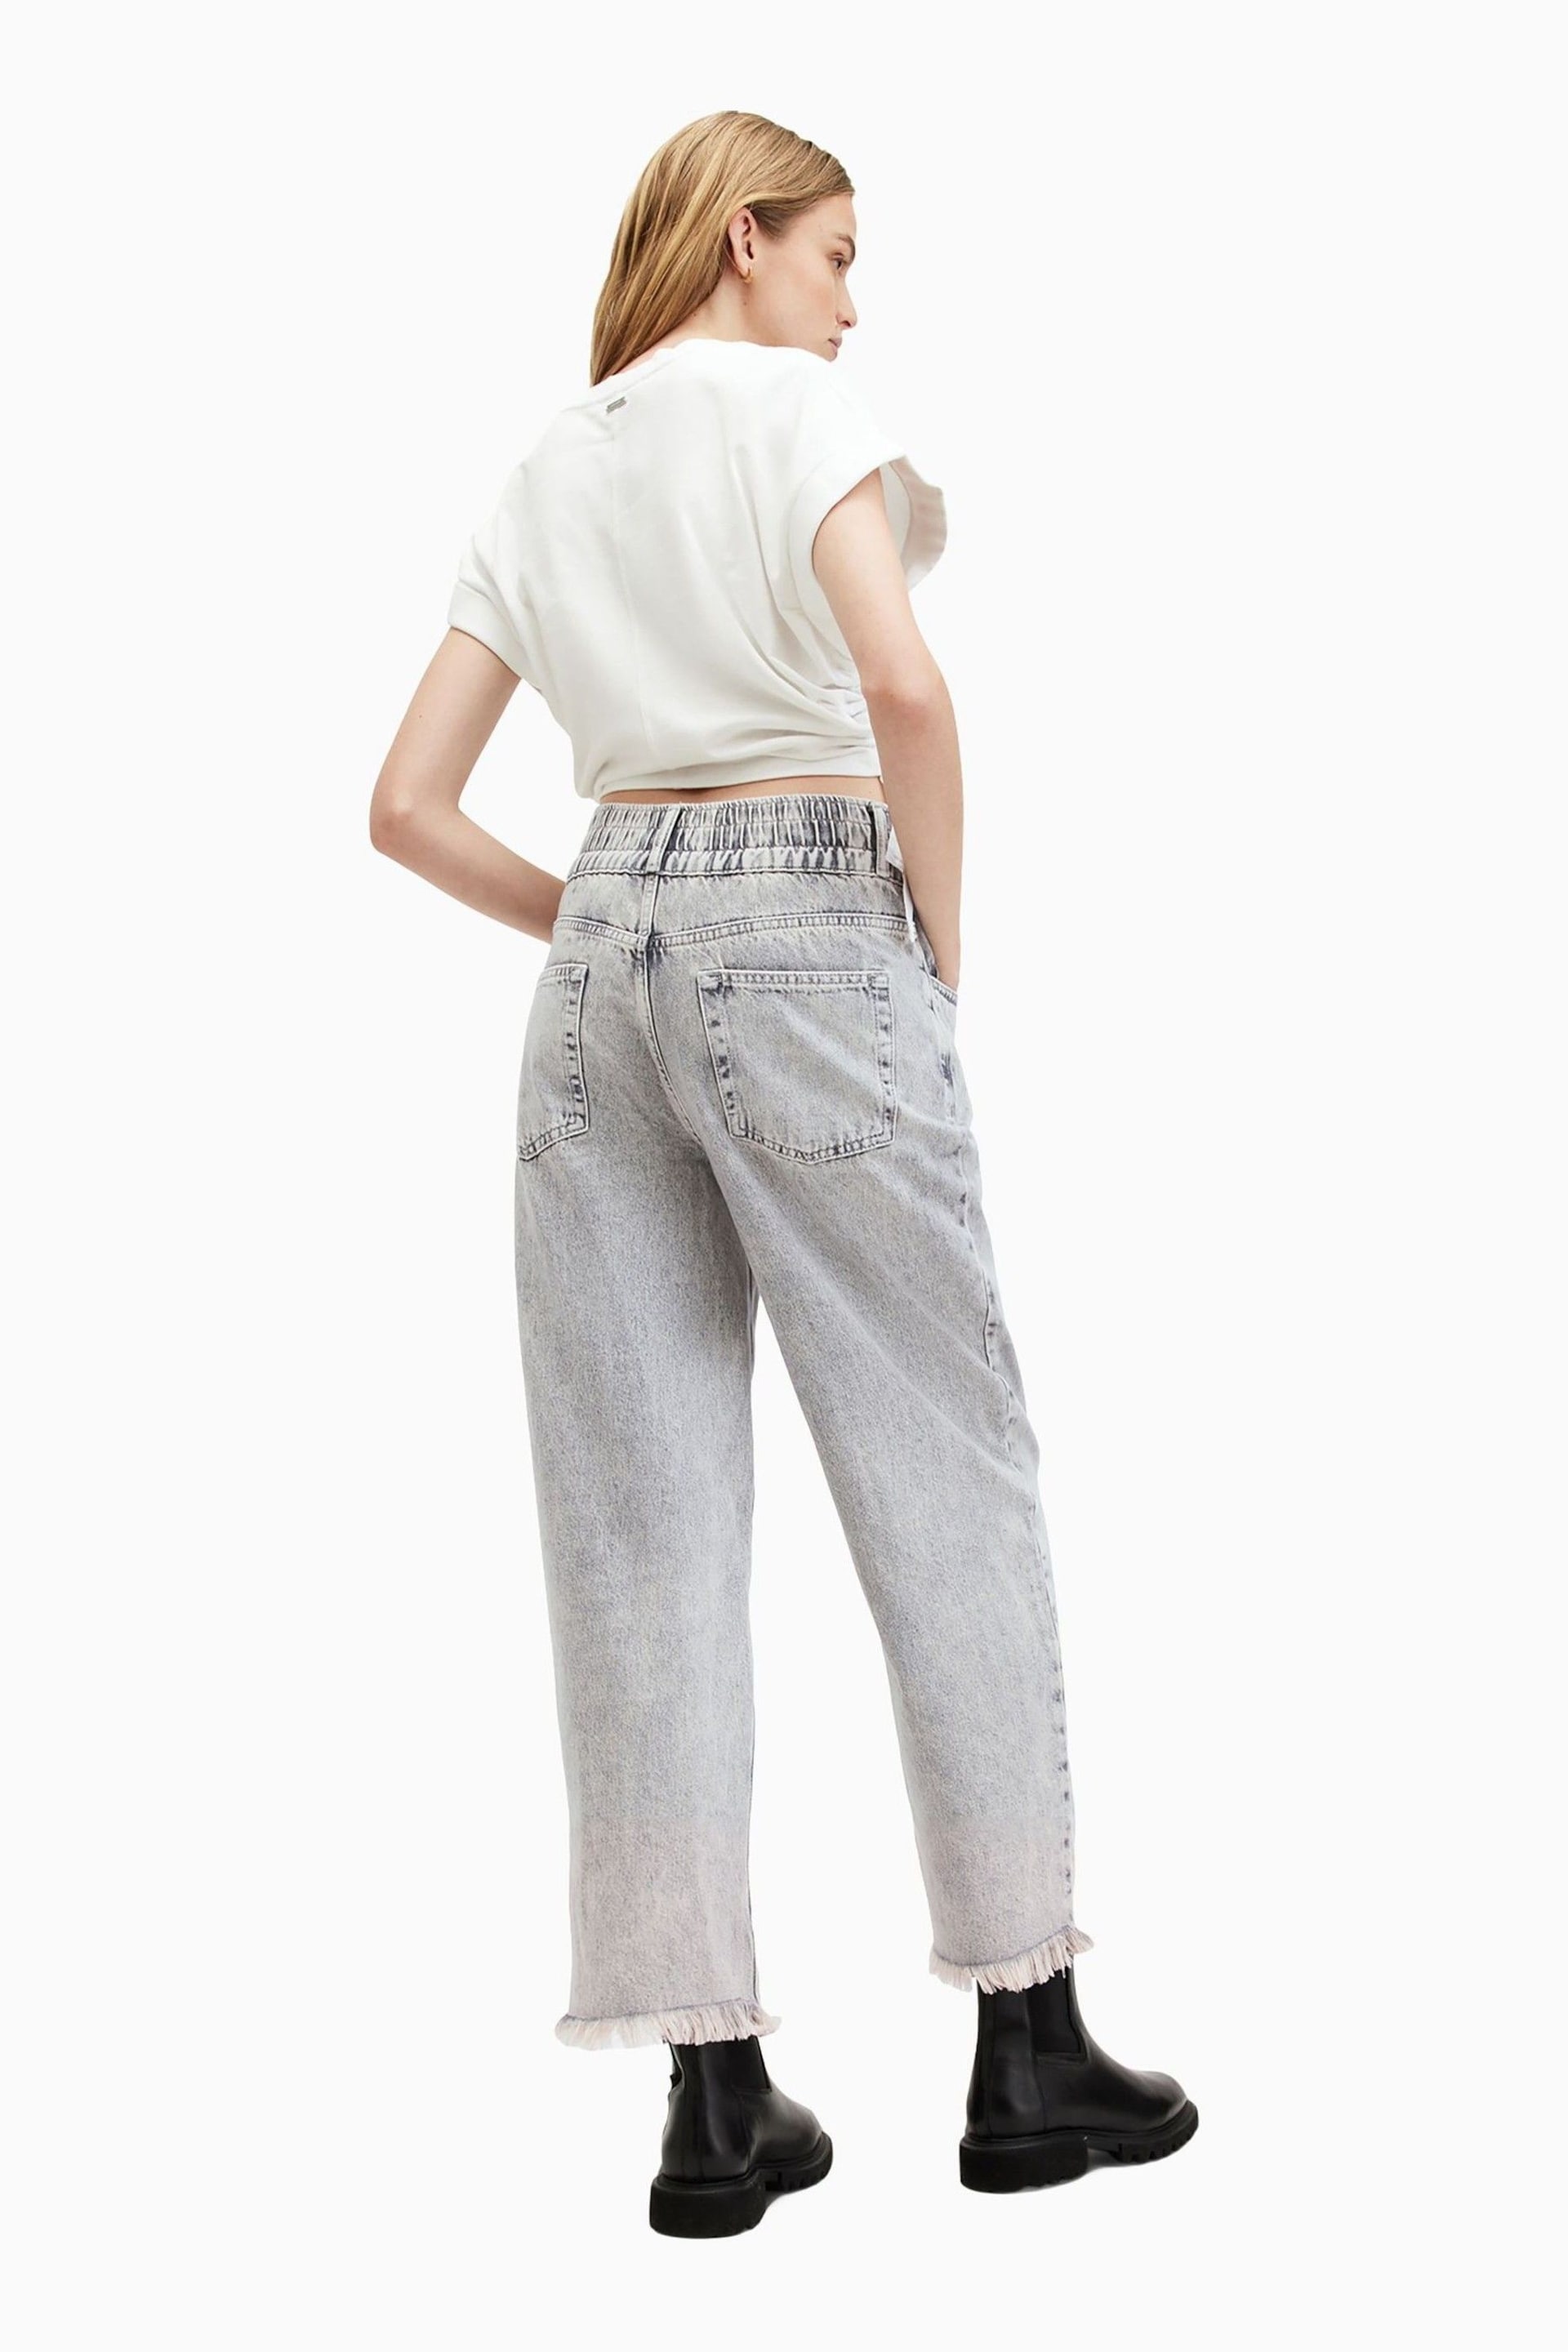 AllSaints Grey Hailey Fray Jeans - Image 3 of 6